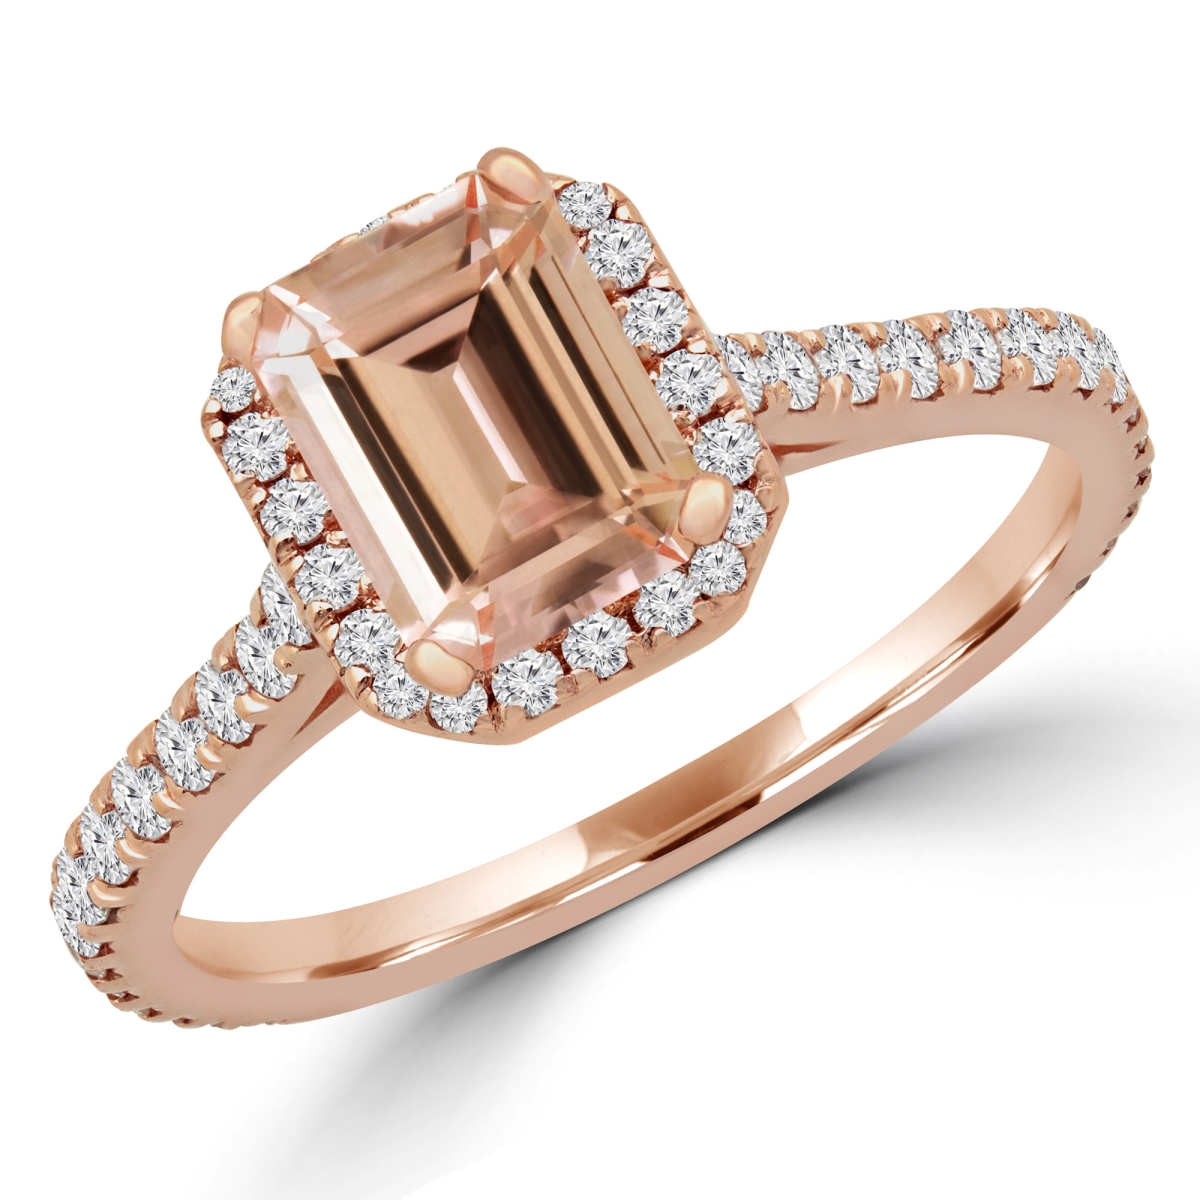 Picture of Majesty Diamonds MD180580-7.25 1.25 CTW Emerald Pink Morganite Halo Engagement Ring in 14K Rose Gold - Size 7.25